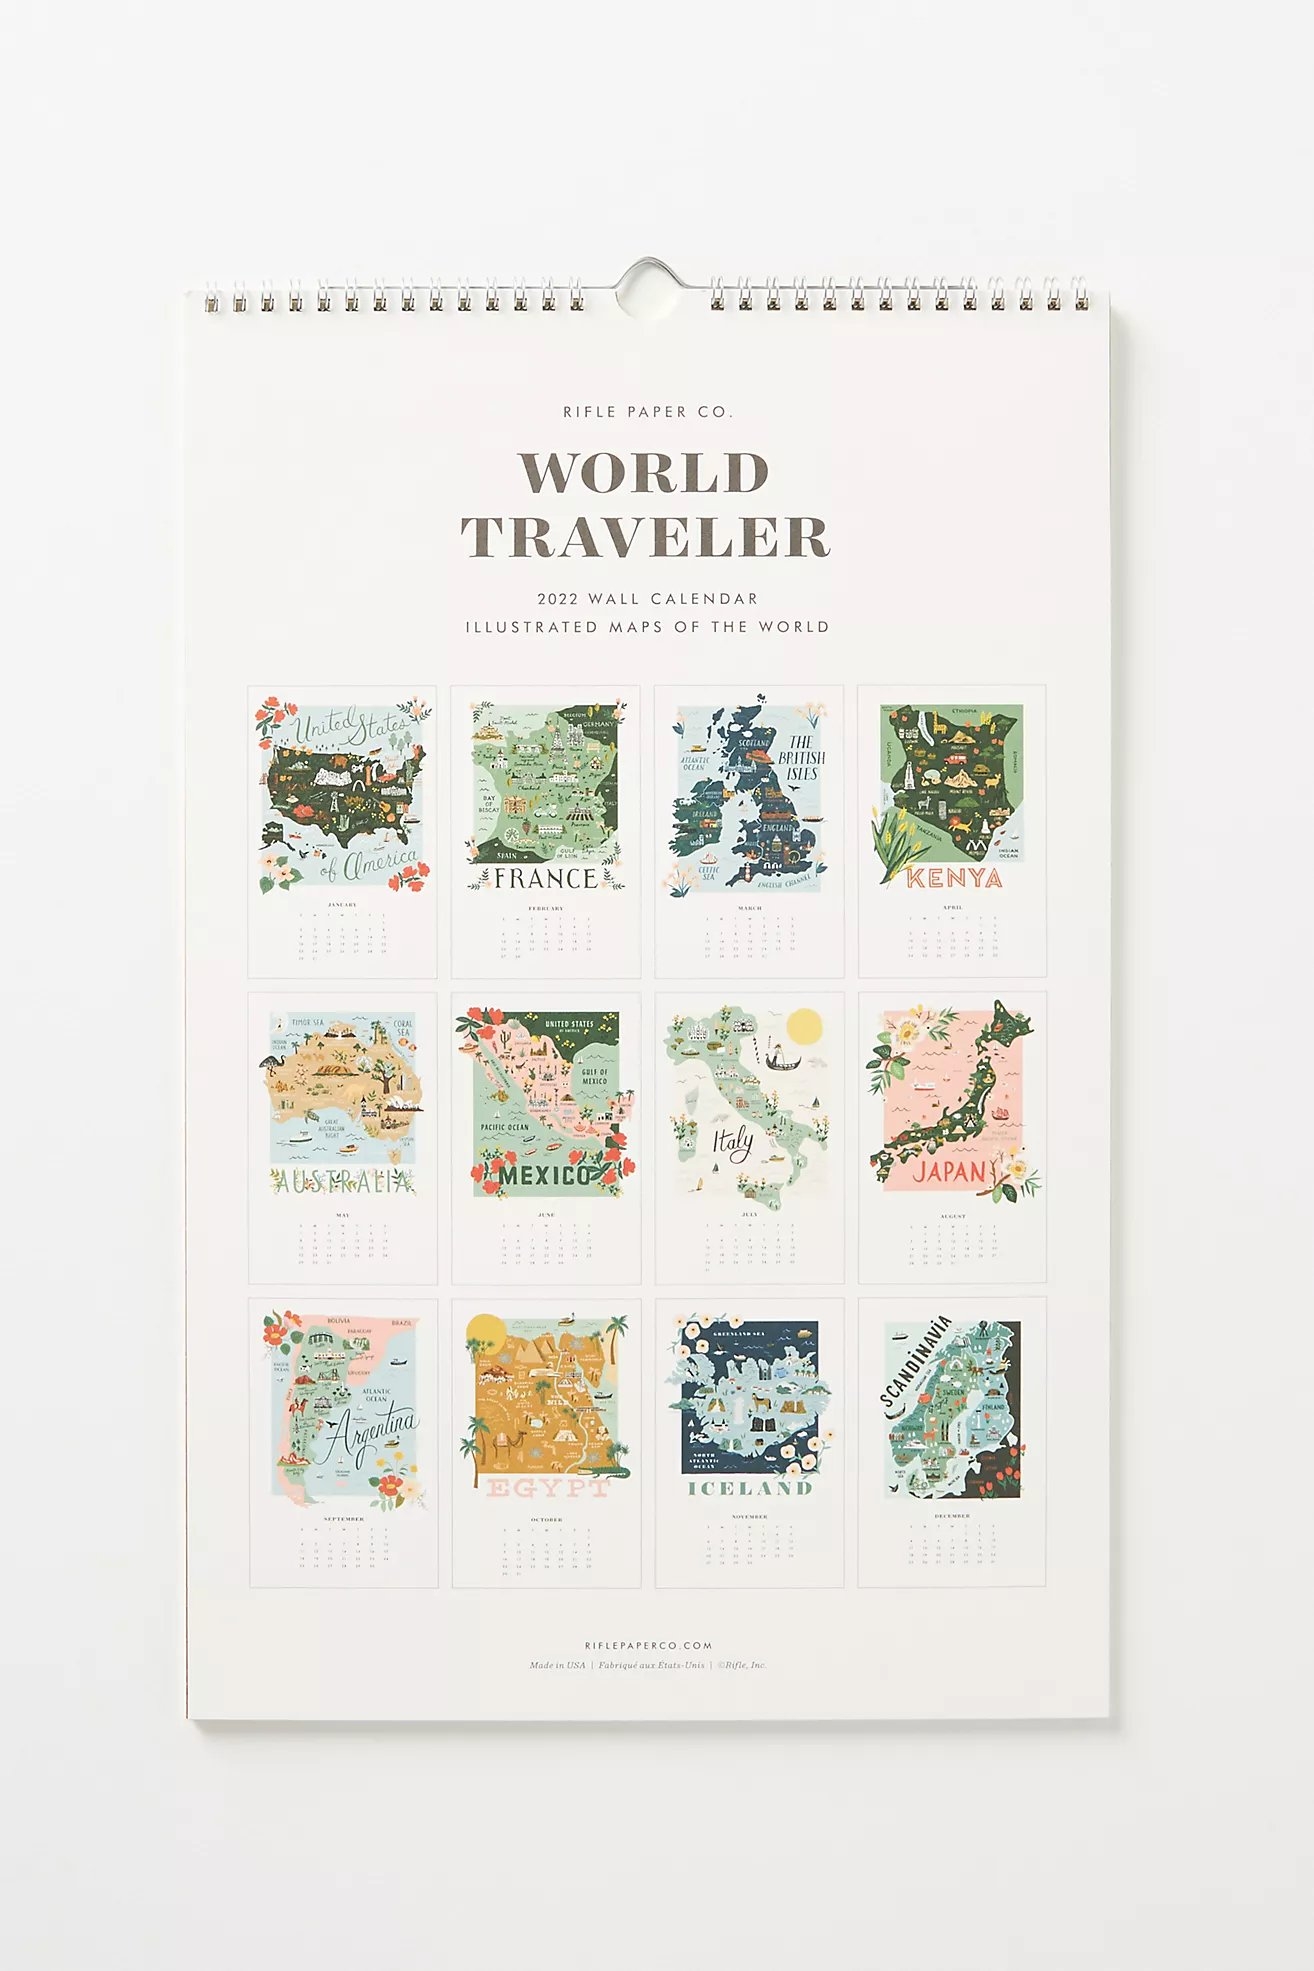 Rifle Paper Co. World Traveler 2022 Wall Calendar By Rifle Paper Co. in White - Image 3